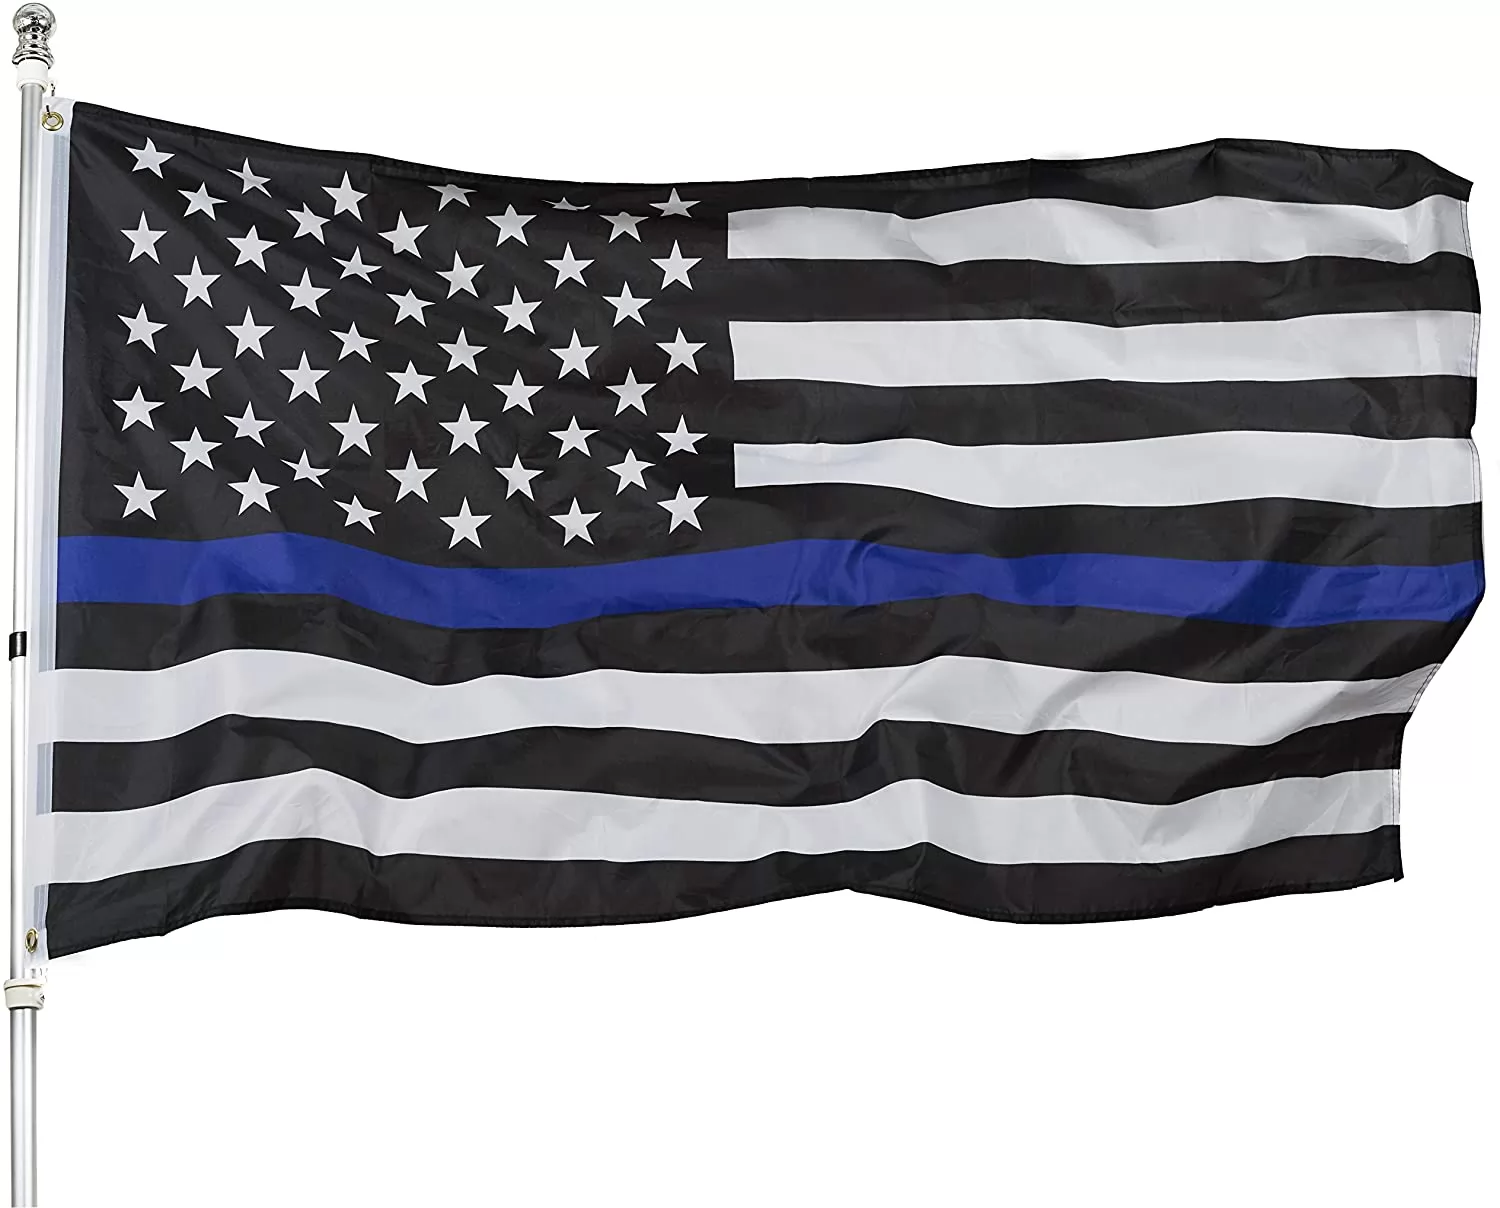 Thin Blue Line American Flag - 3x5 Blue Stripe American Matter Flags - USA Honoring Law Enforcement Officers Banner Flags Outdoor Indoor